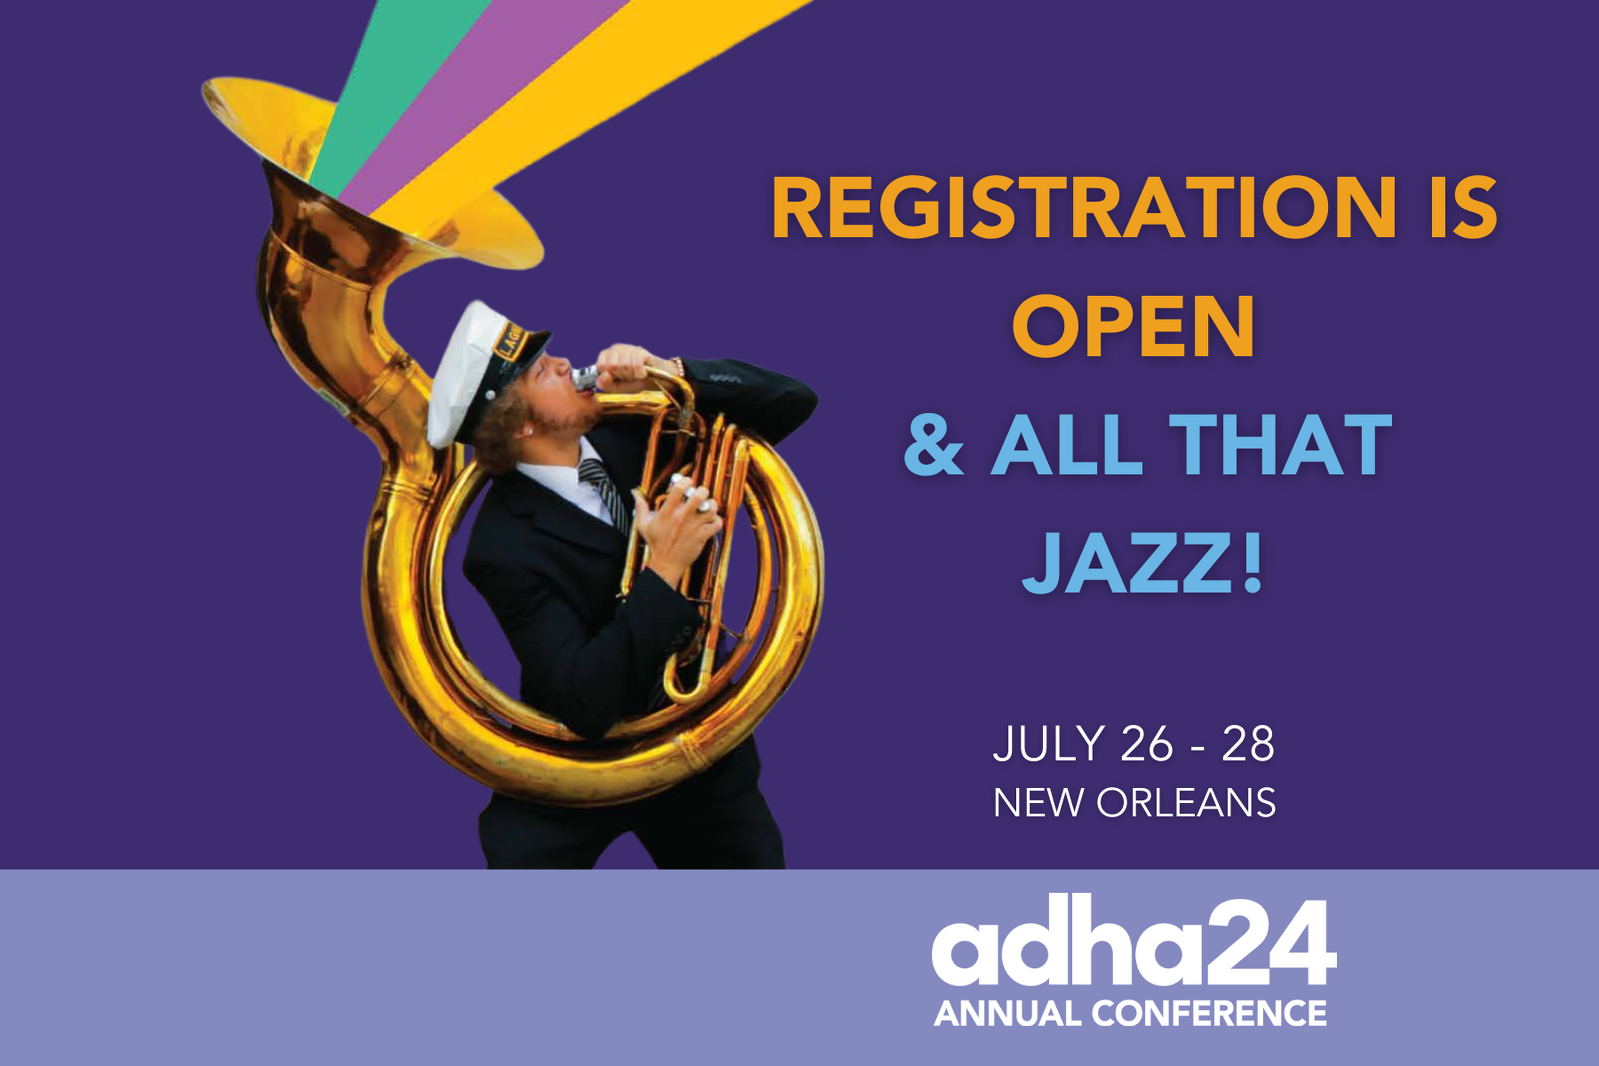 ADHA24 Registration is Open!